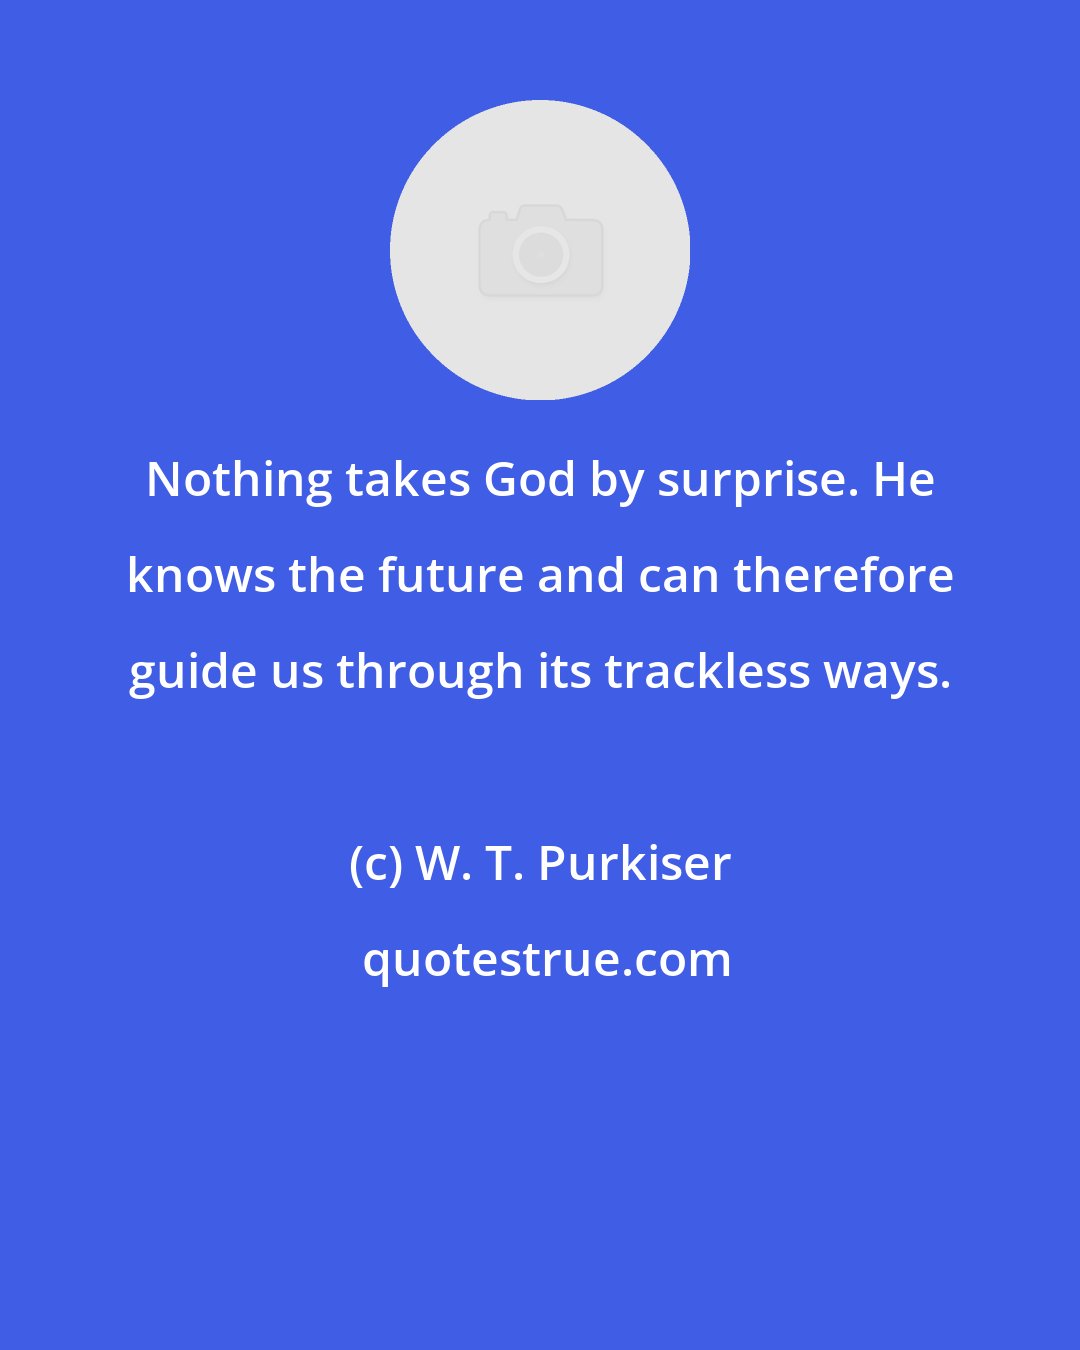 W. T. Purkiser: Nothing takes God by surprise. He knows the future and can therefore guide us through its trackless ways.